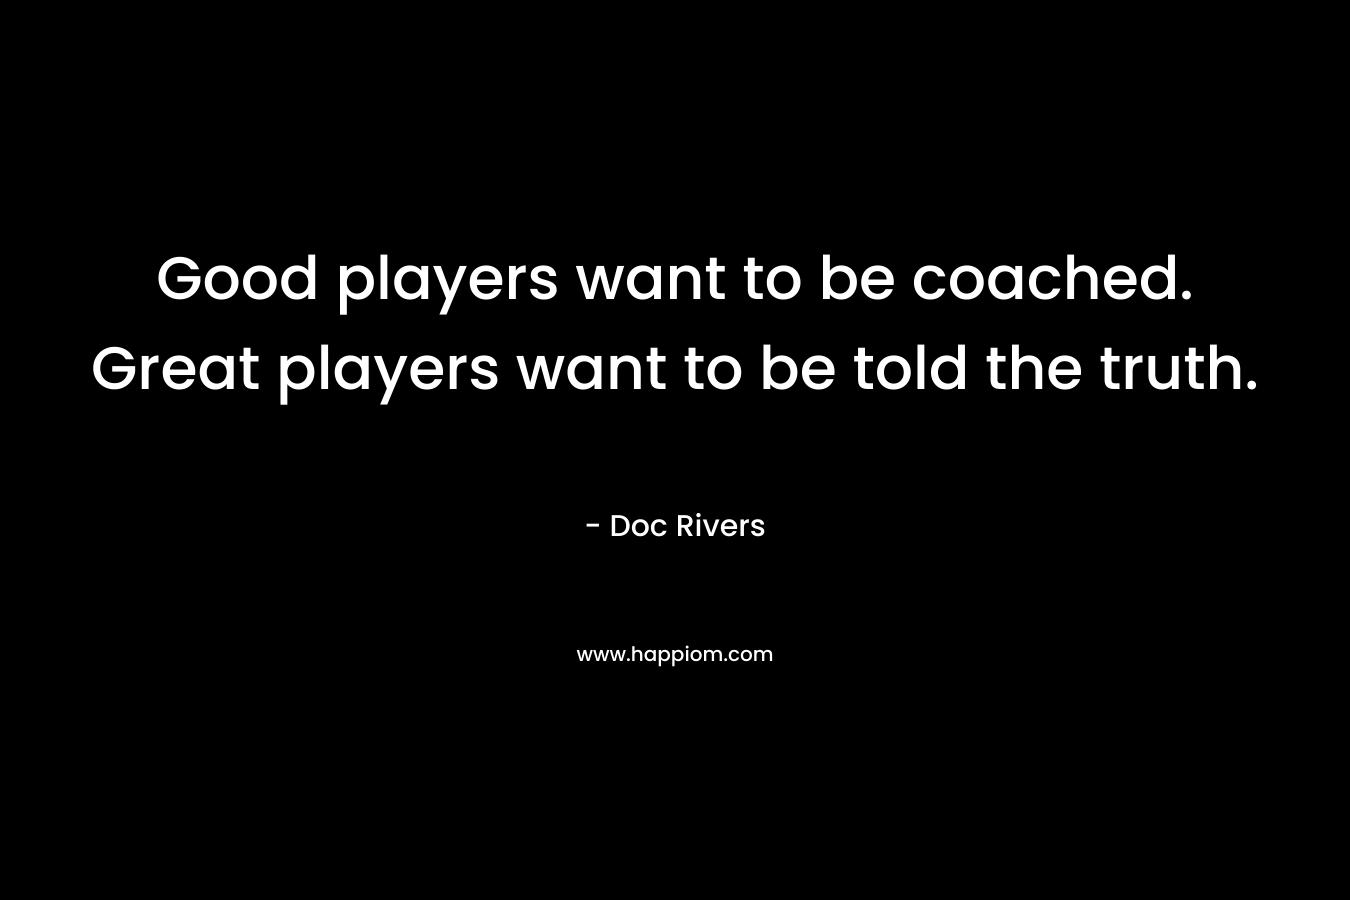 Good players want to be coached. Great players want to be told the truth.